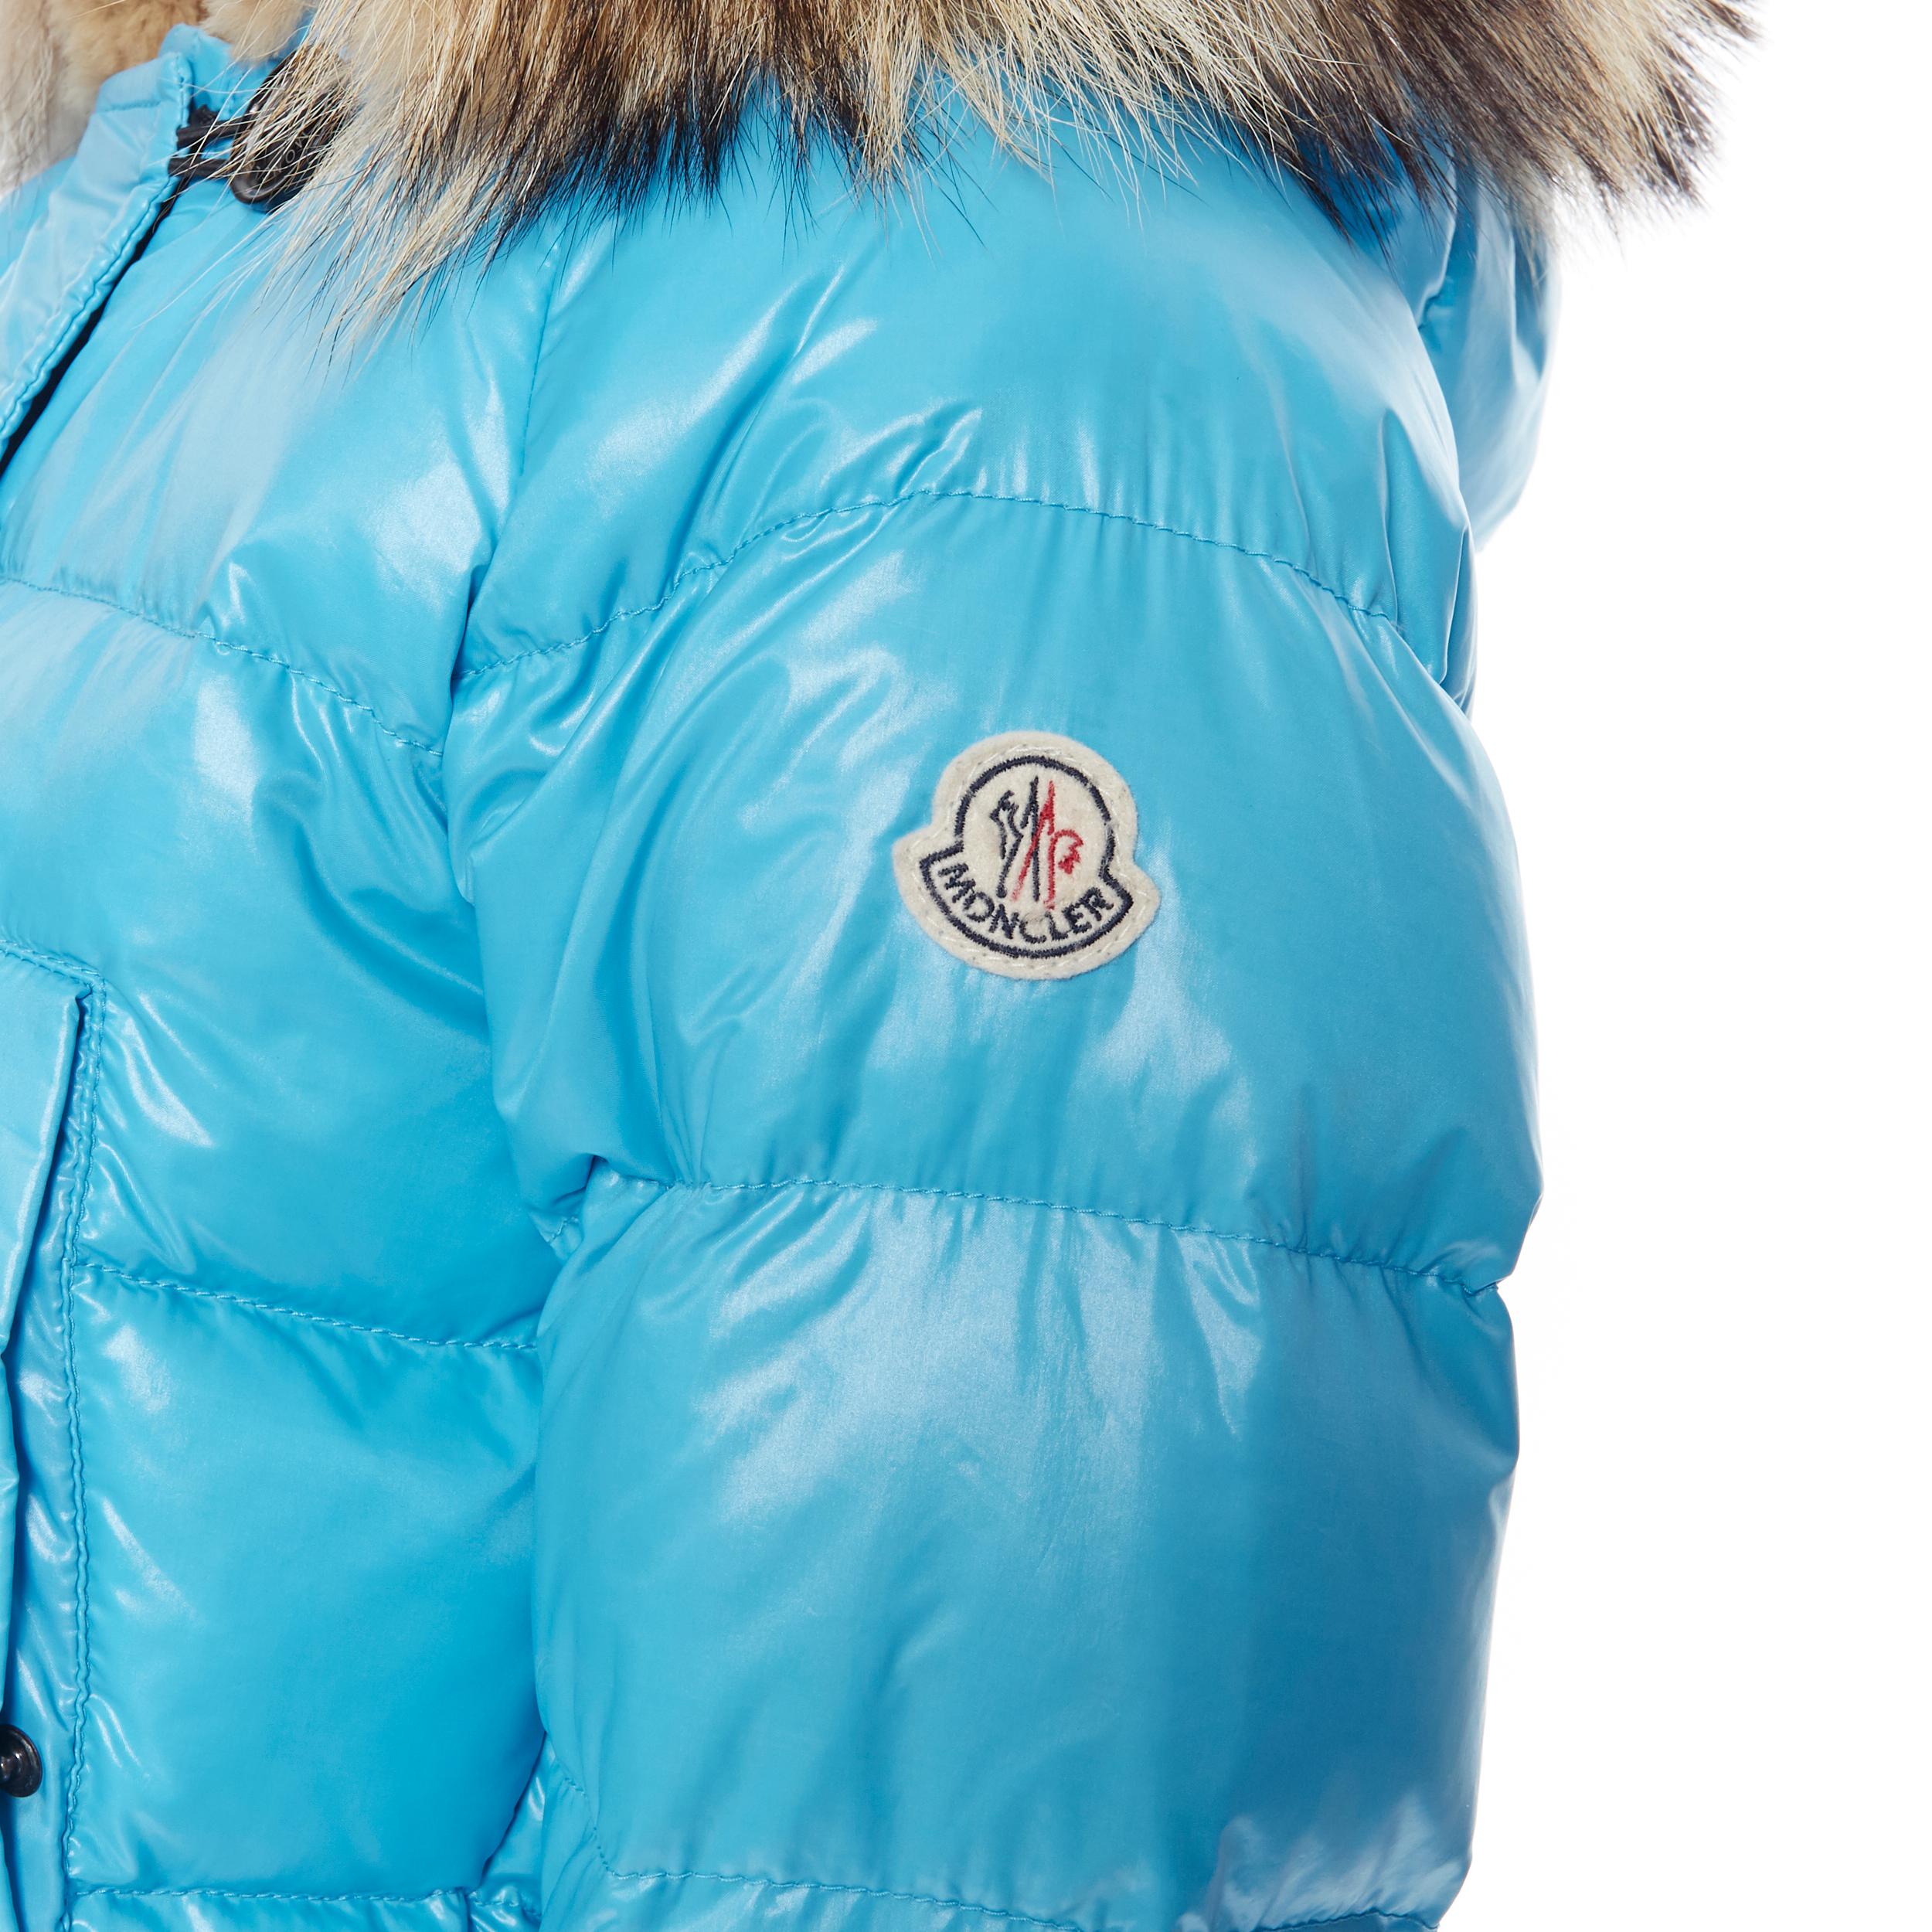 MONCLER brown fur lined hood blue down feather cropped puffer jacket US0 XS
Brand: Moncler
Model Name / Style: Puffer jacket
Material: Nylon, down, fur
Color: Blue
Pattern: Solid
Closure: Button
Extra Detail: Sky blue nylon. Genuine duvet down